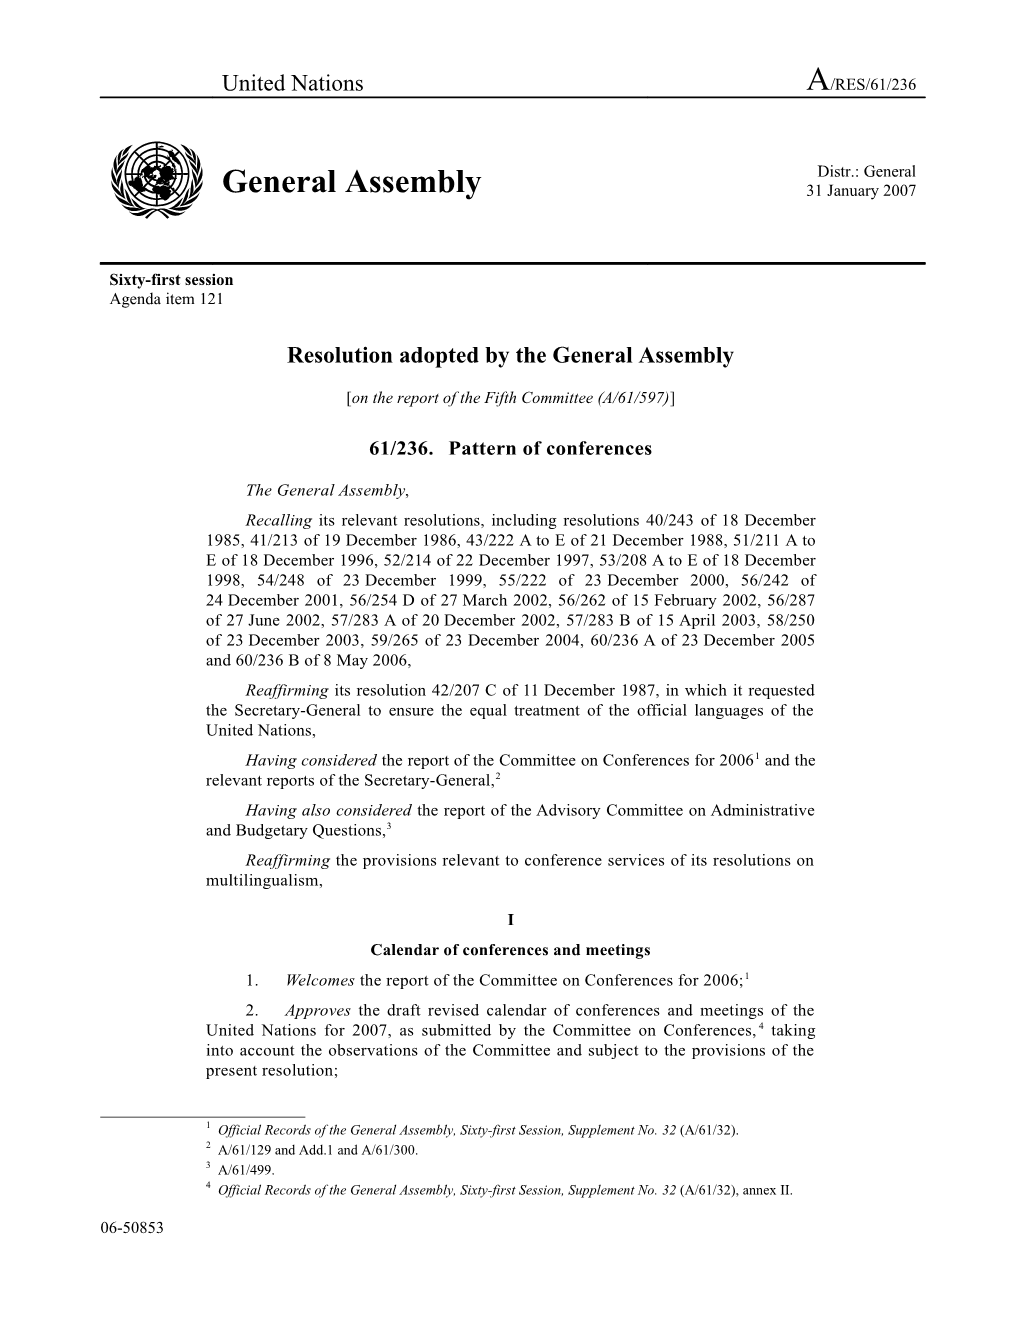 Resolution Adopted by the General Assembly